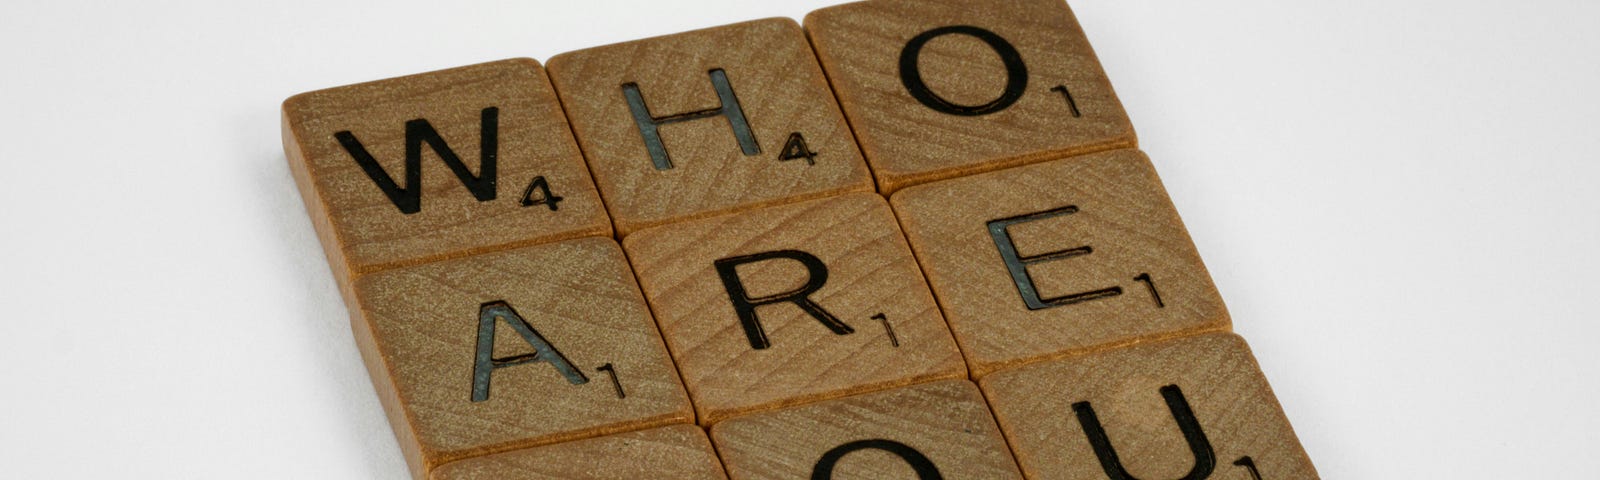 this is a photo of scrabble letters that spell out the words, who are you.